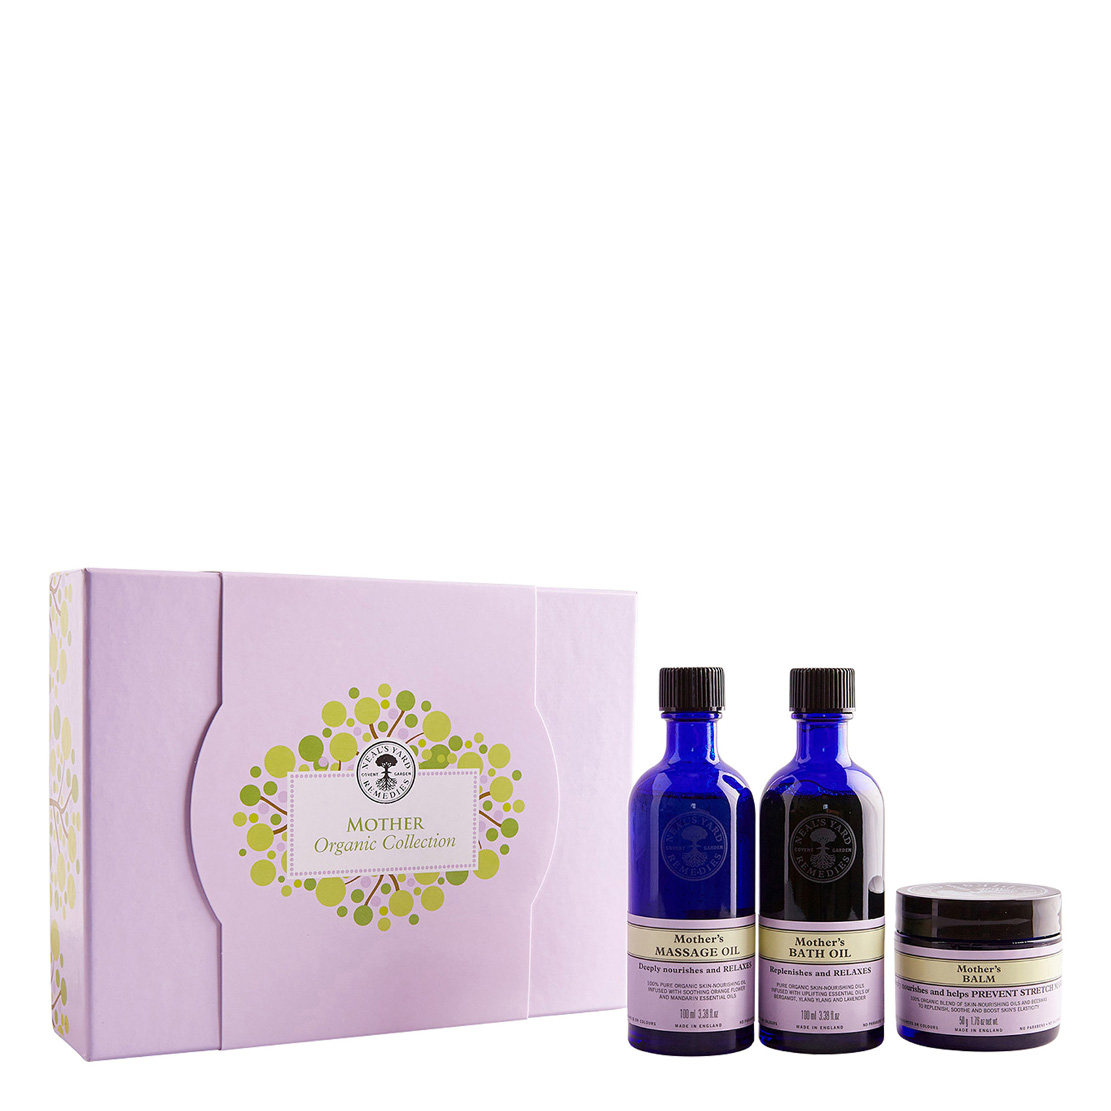 Neal's Yard Remedies Mother Organic Collection